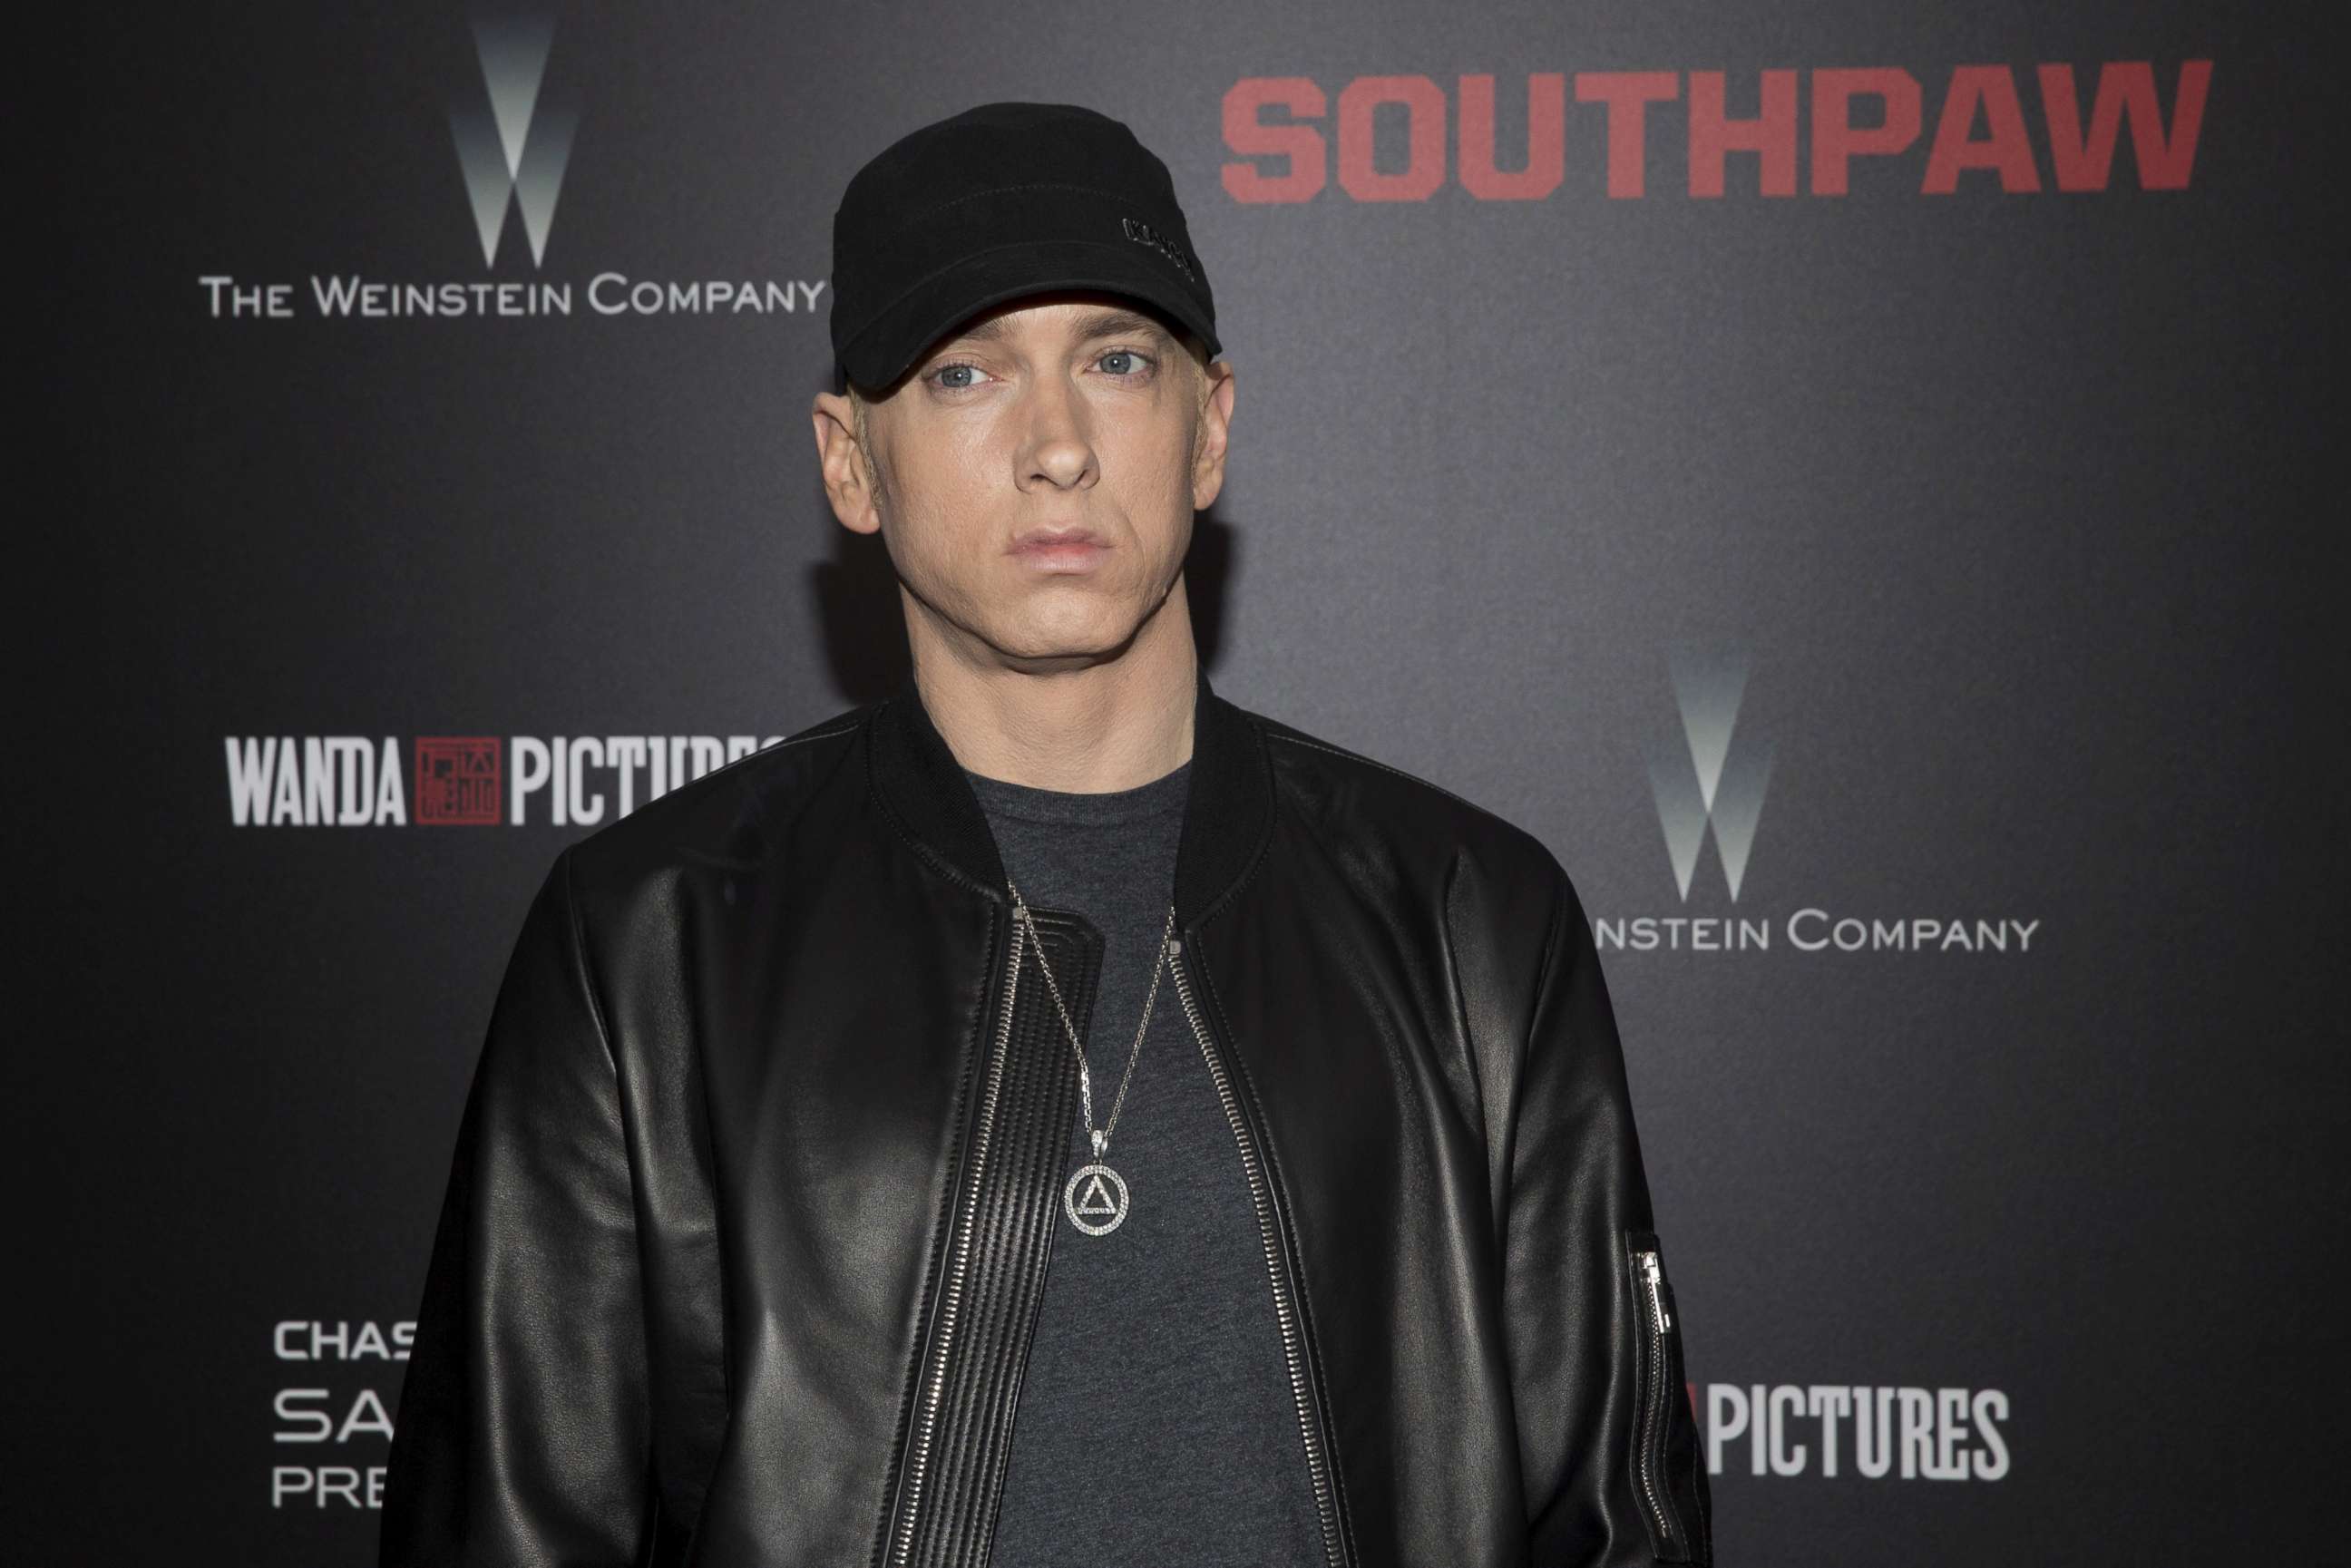 PHOTO: Eminem attends the premiere of "Southpaw" in New York, July 20, 2015. 